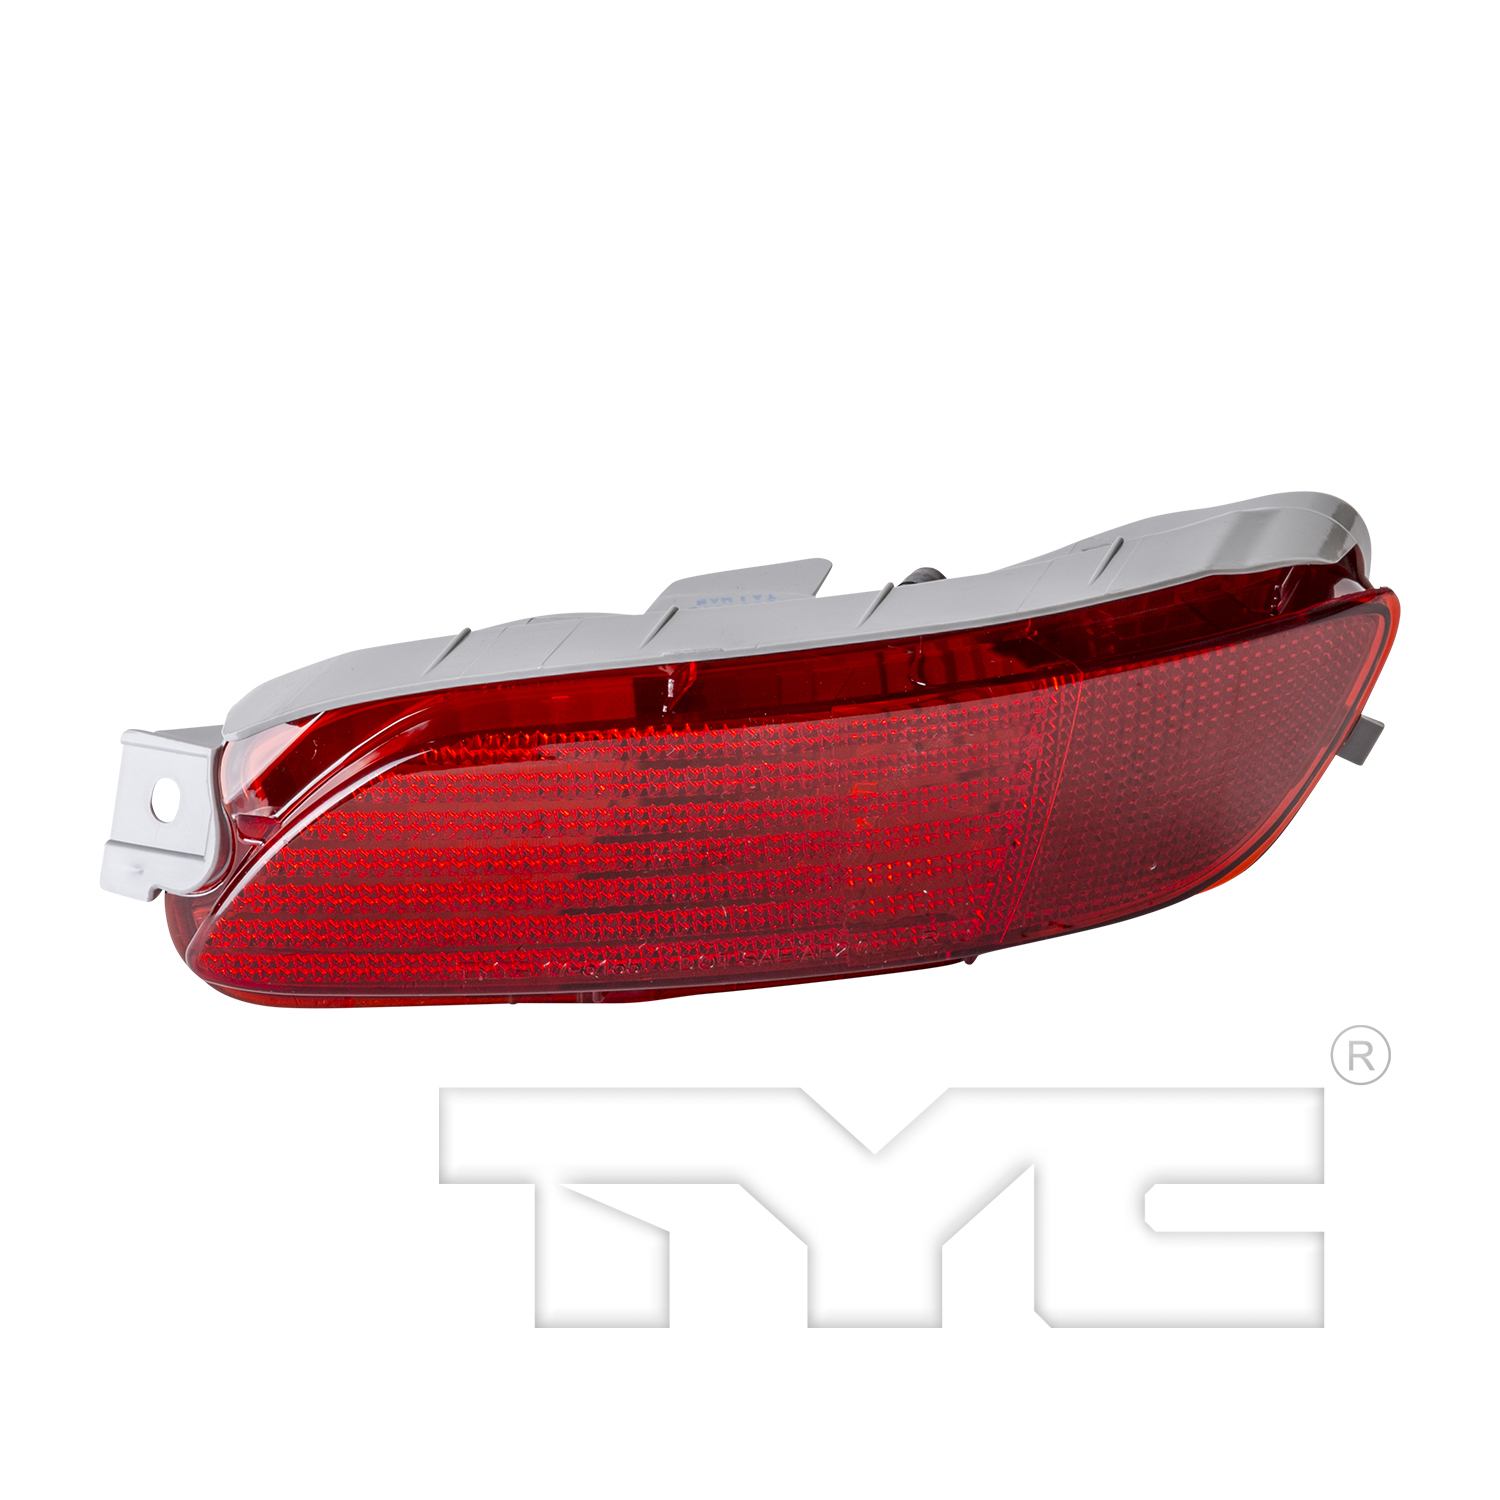 Aftermarket LAMPS for LEXUS - RX330, RX330,04-06,RT Rear marker lamp assy